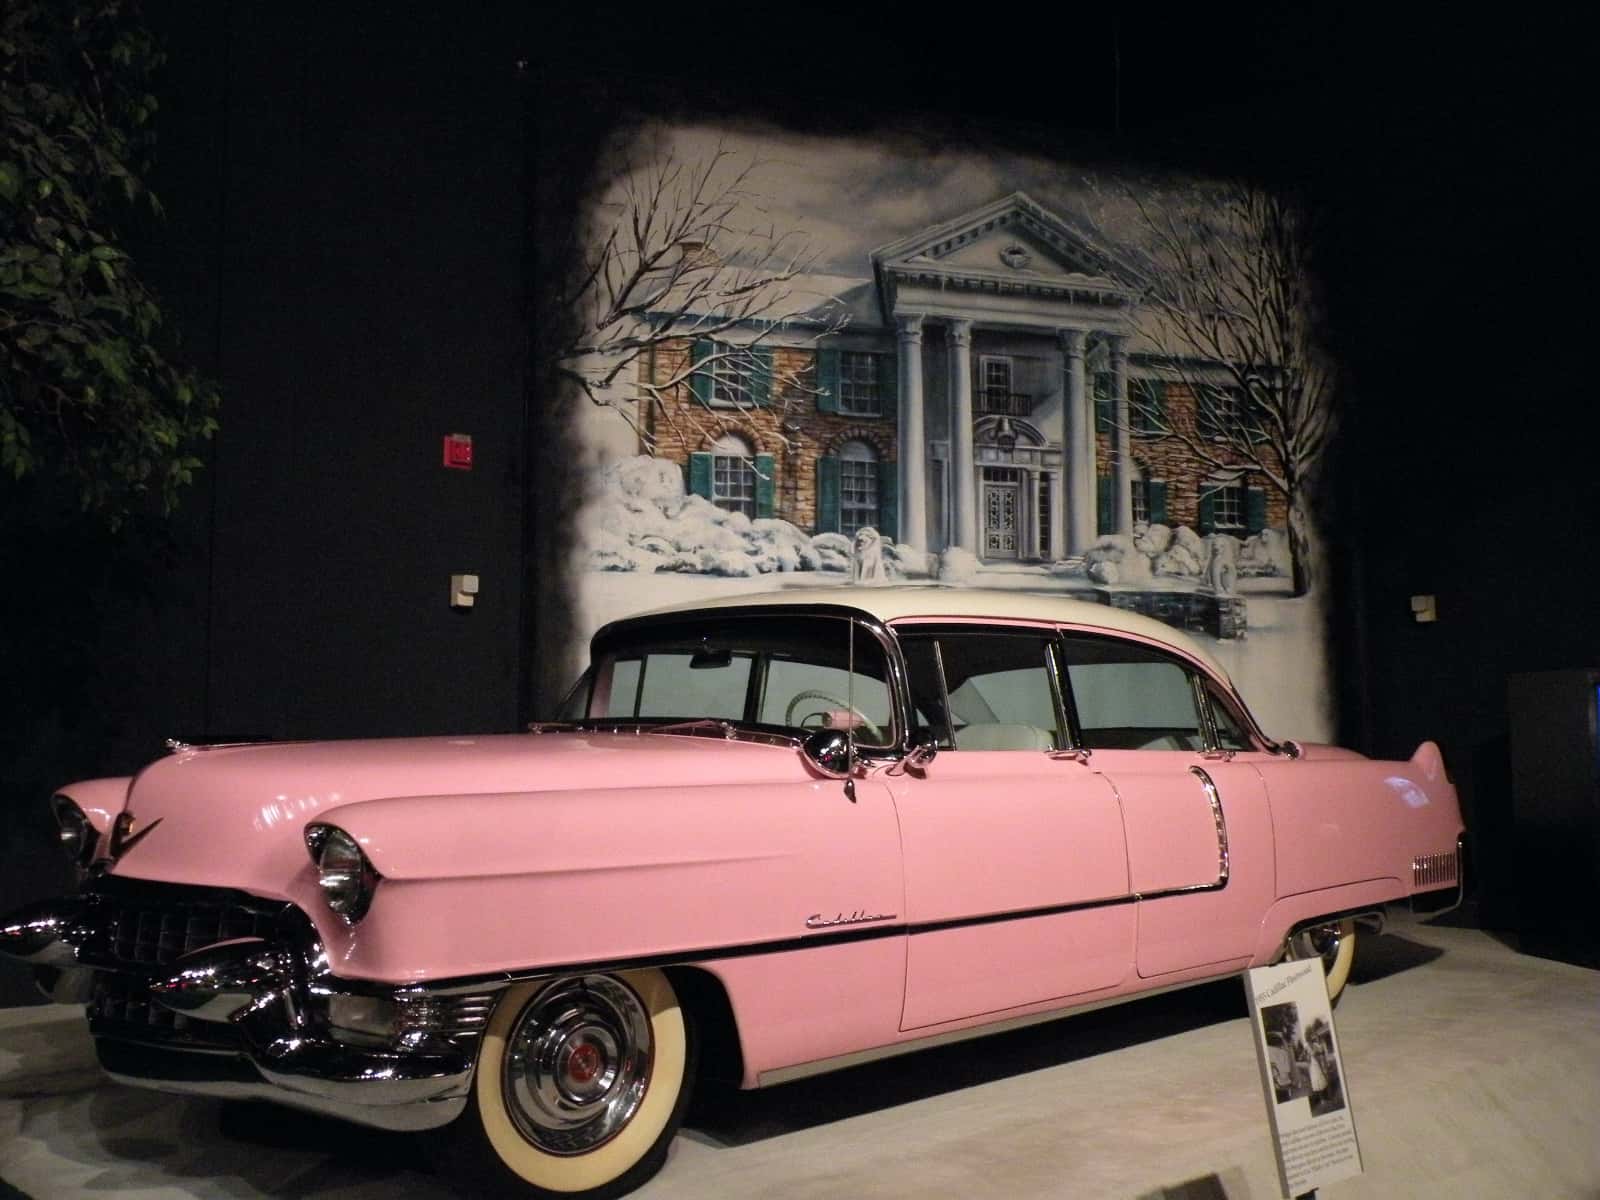 Pink classic car owned by Elvis Presley